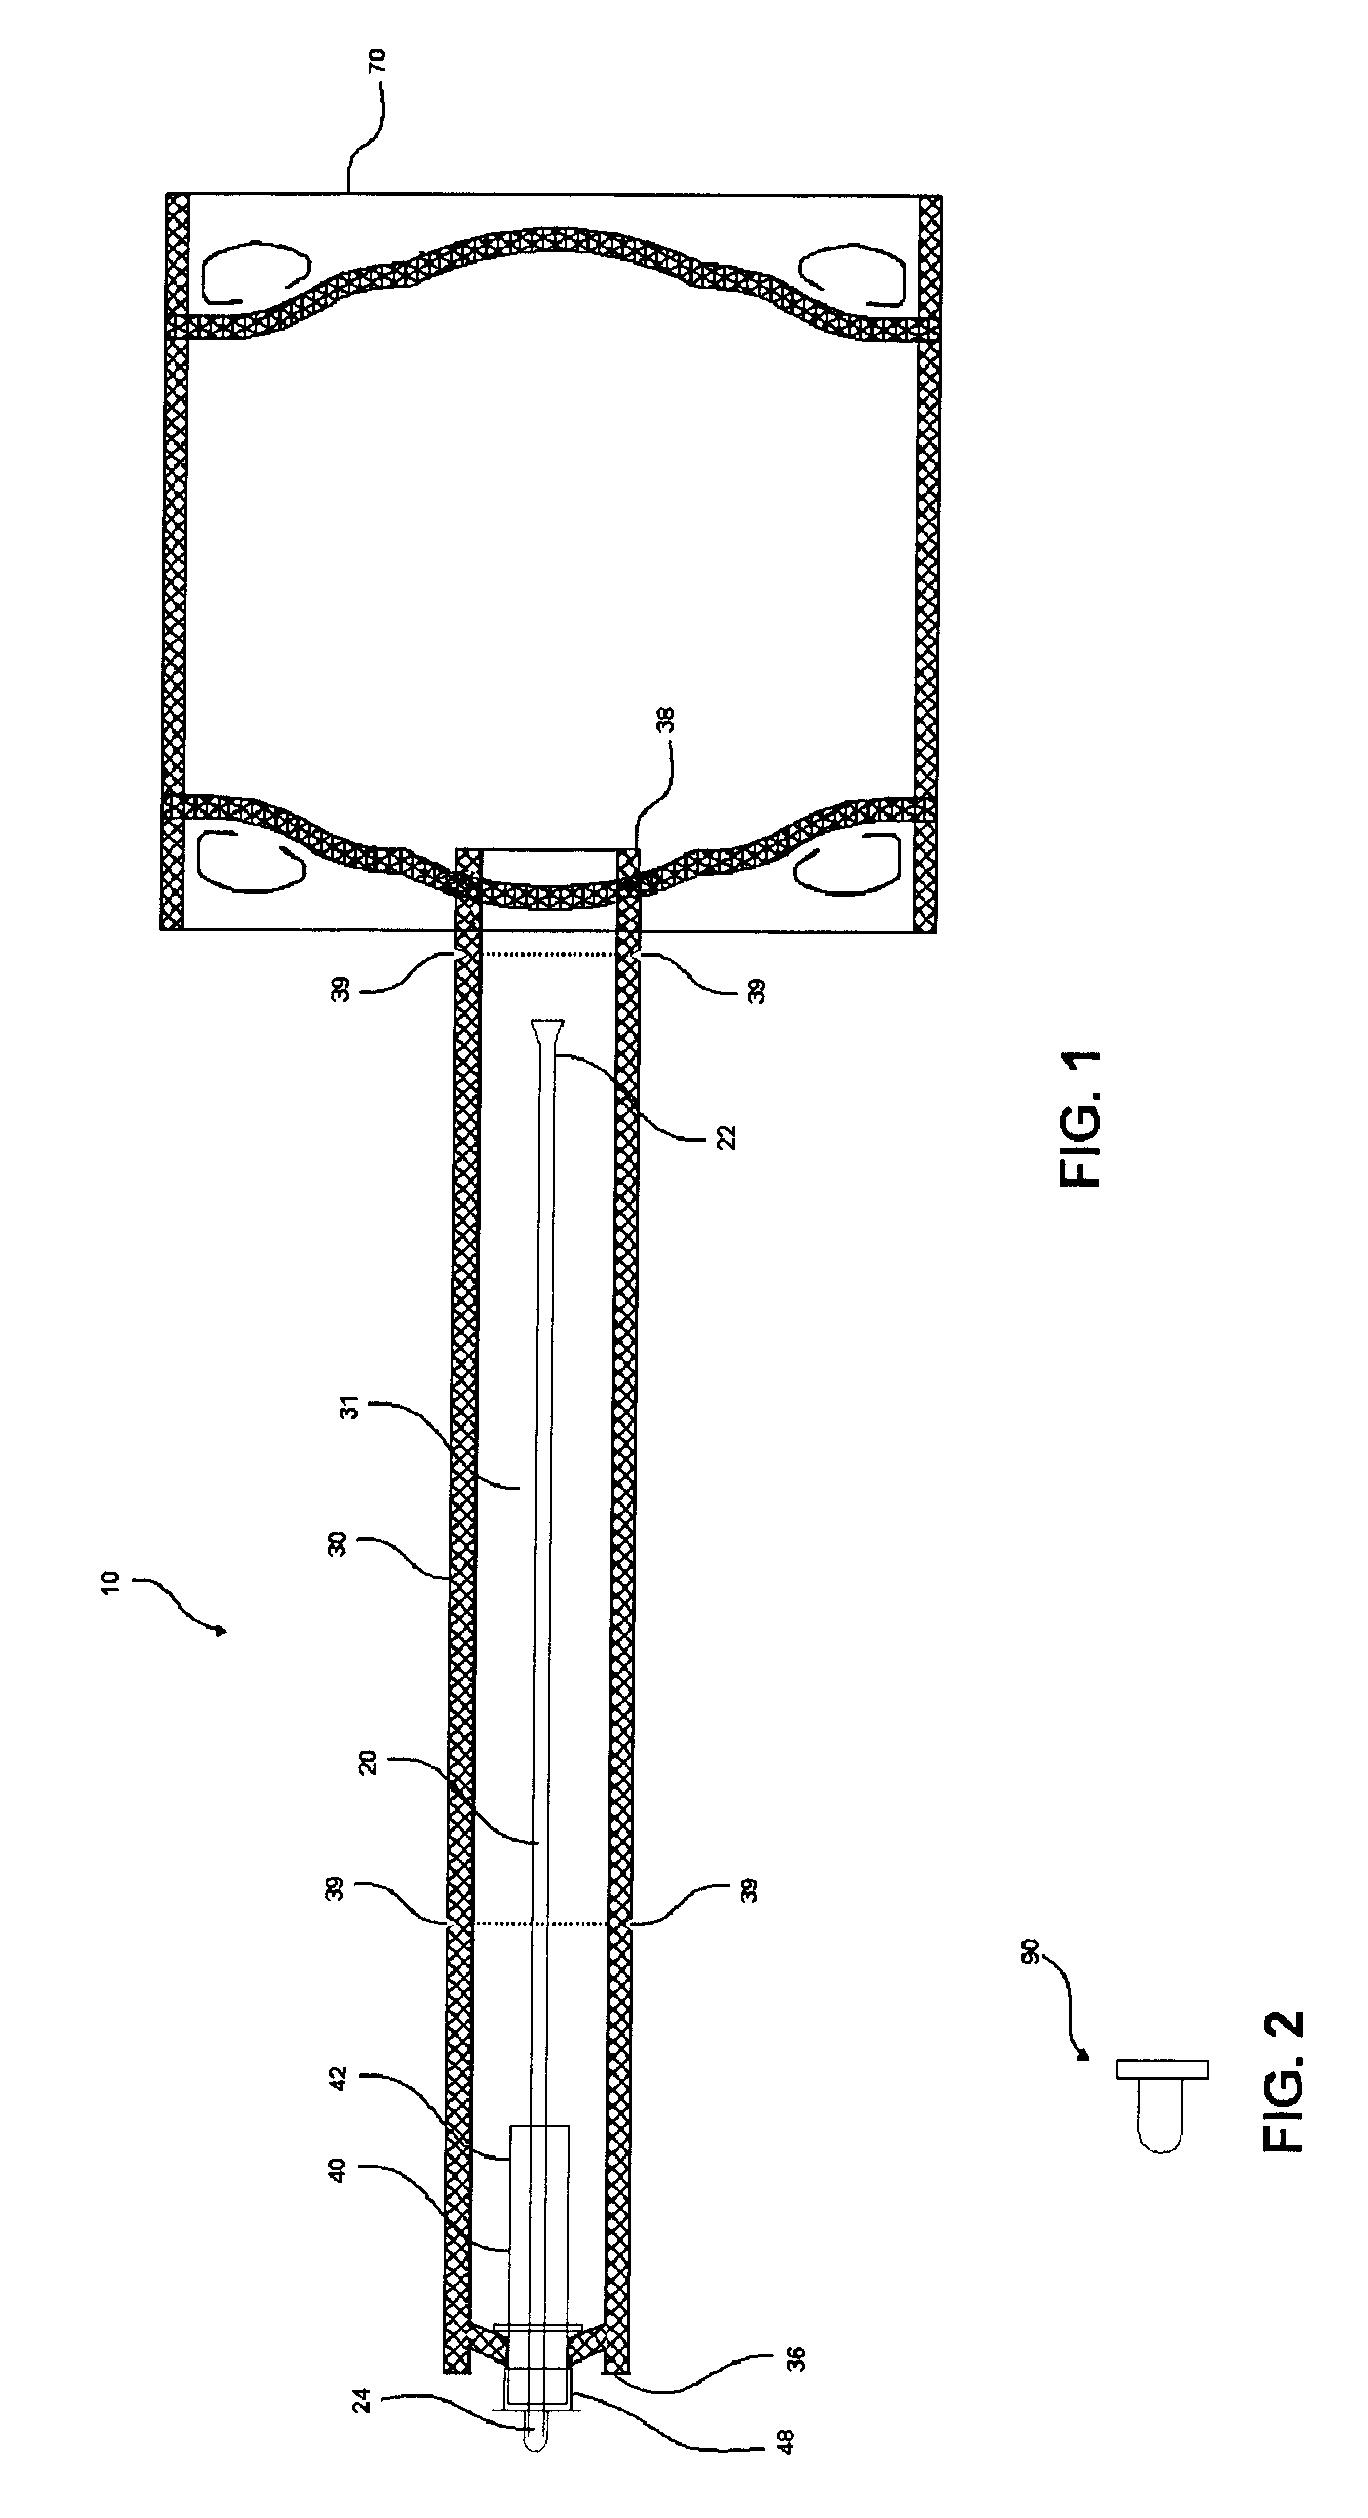 Urinary catheter collection system